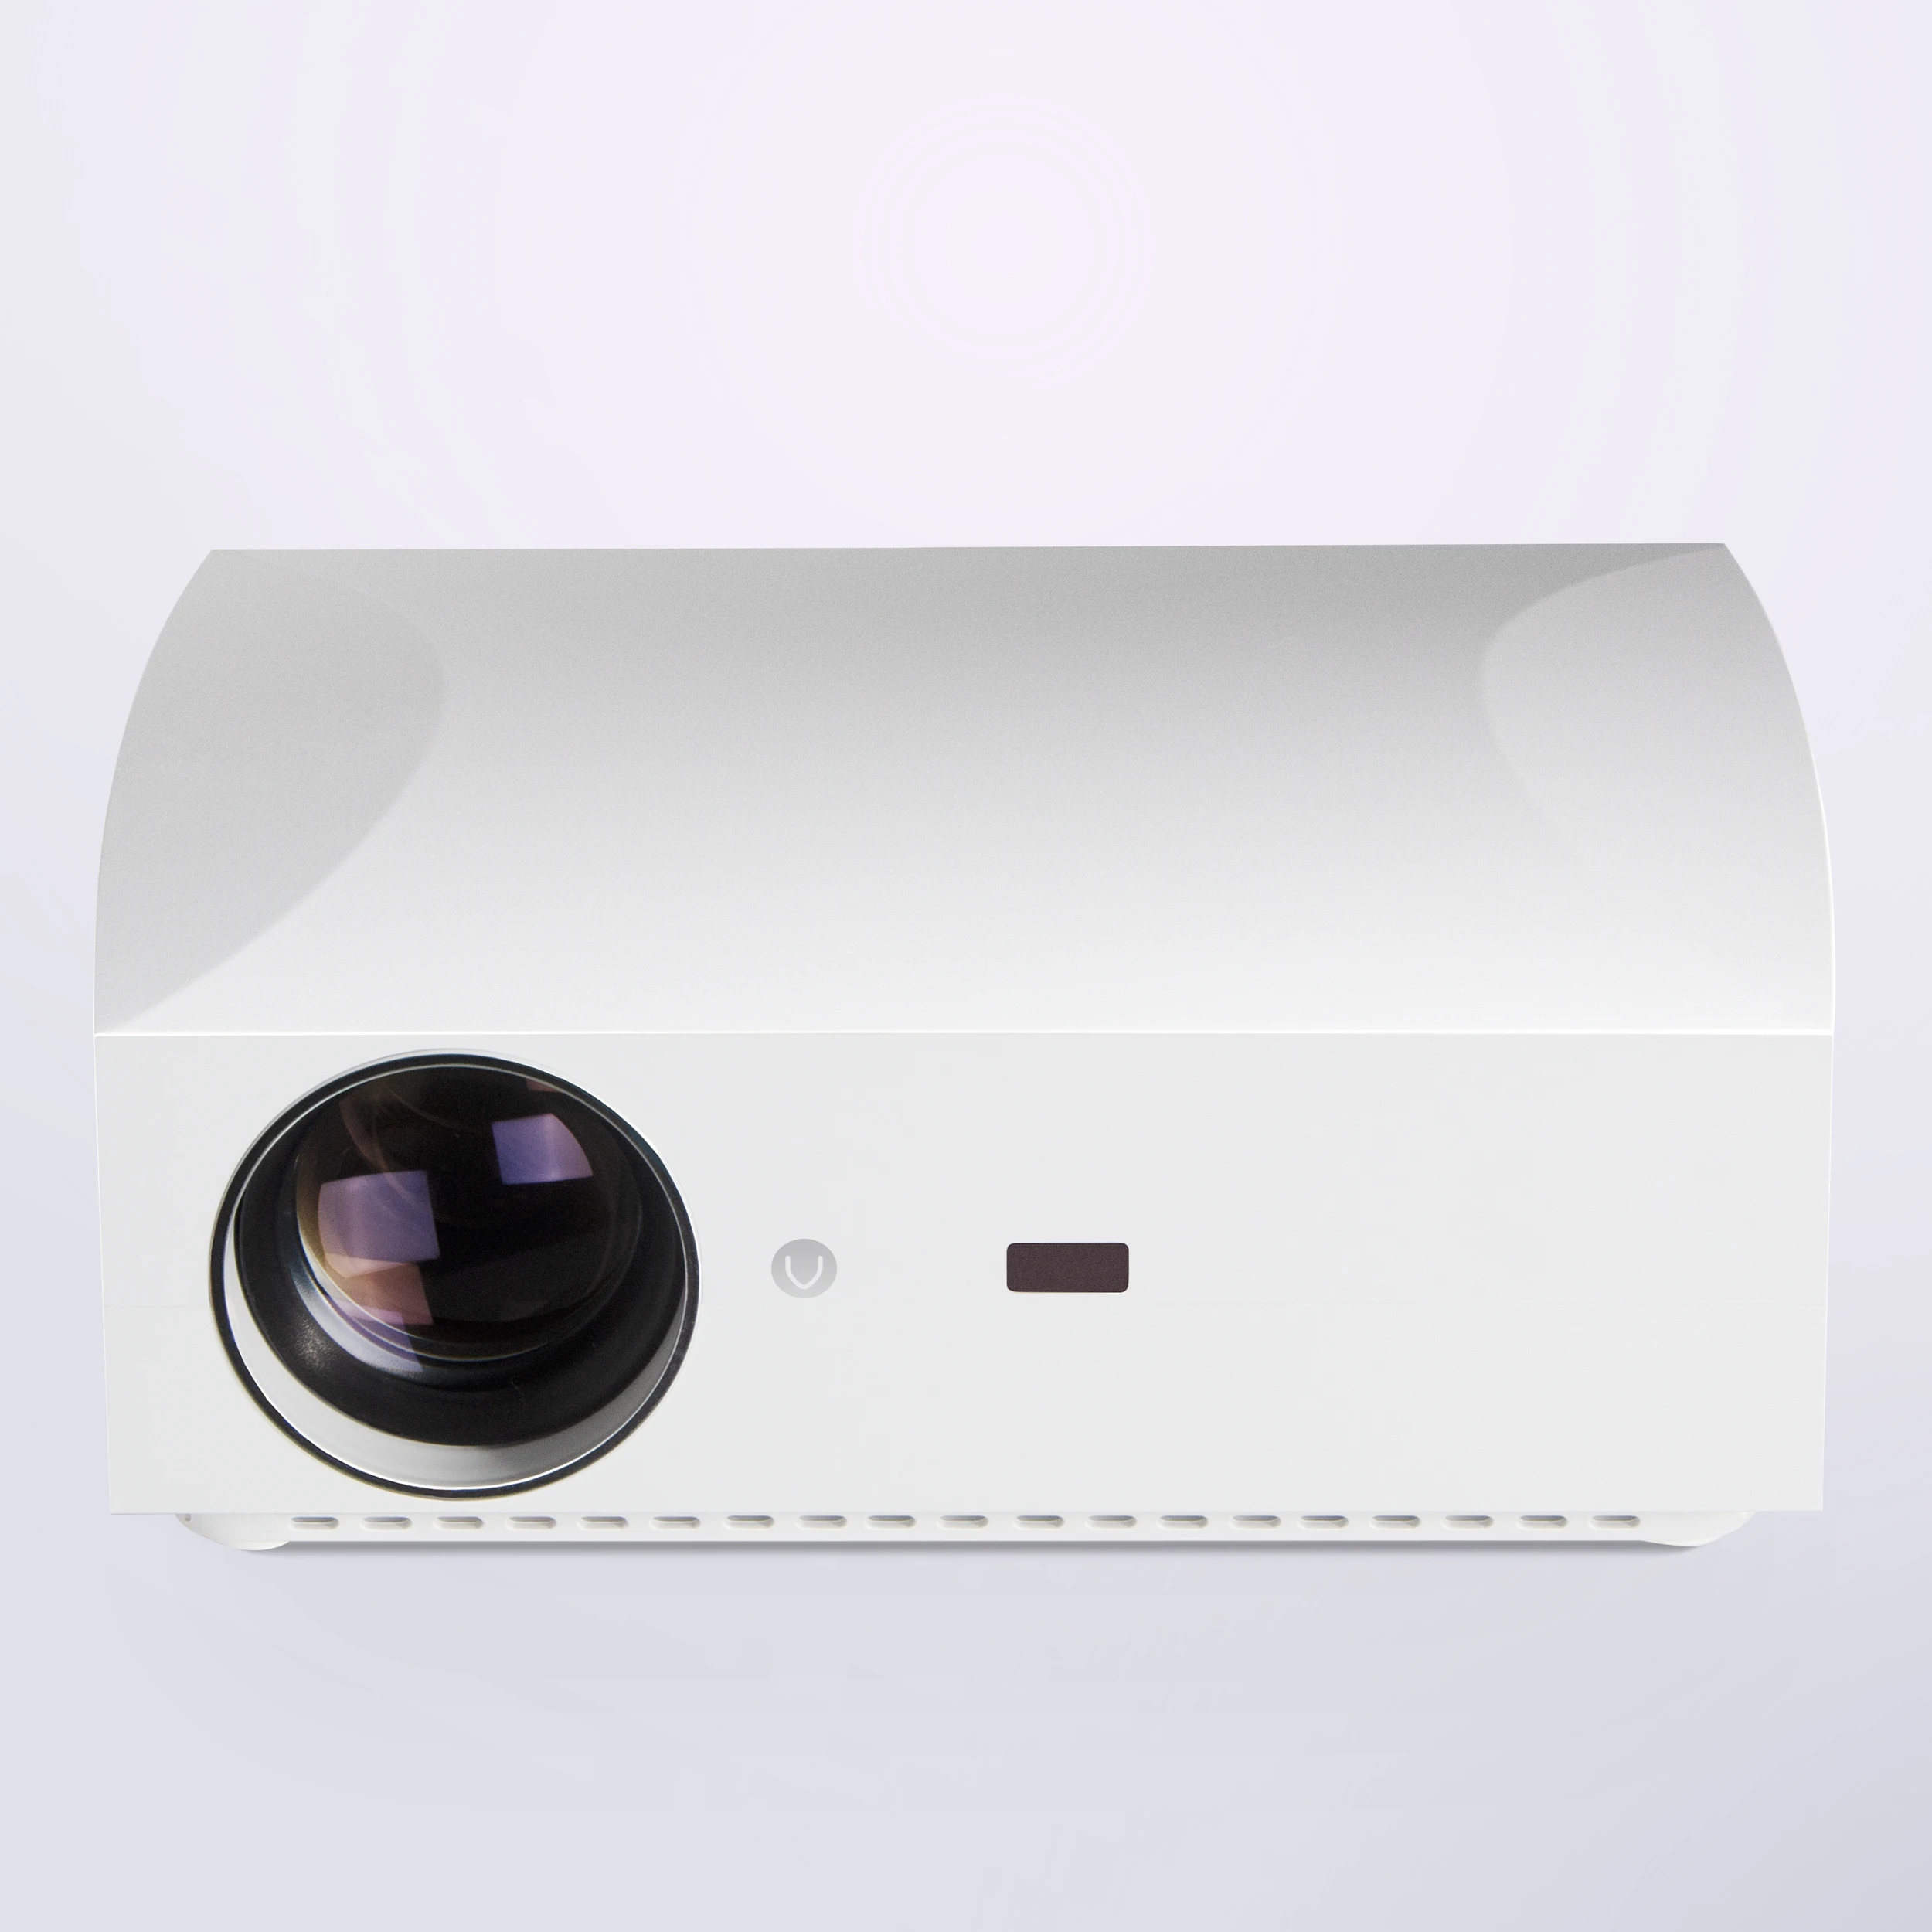 

Hot sell Vivibright Mirroring Projector F30 1080P Full HD Projector Support Airplay & Miracast Home Media Player Projector